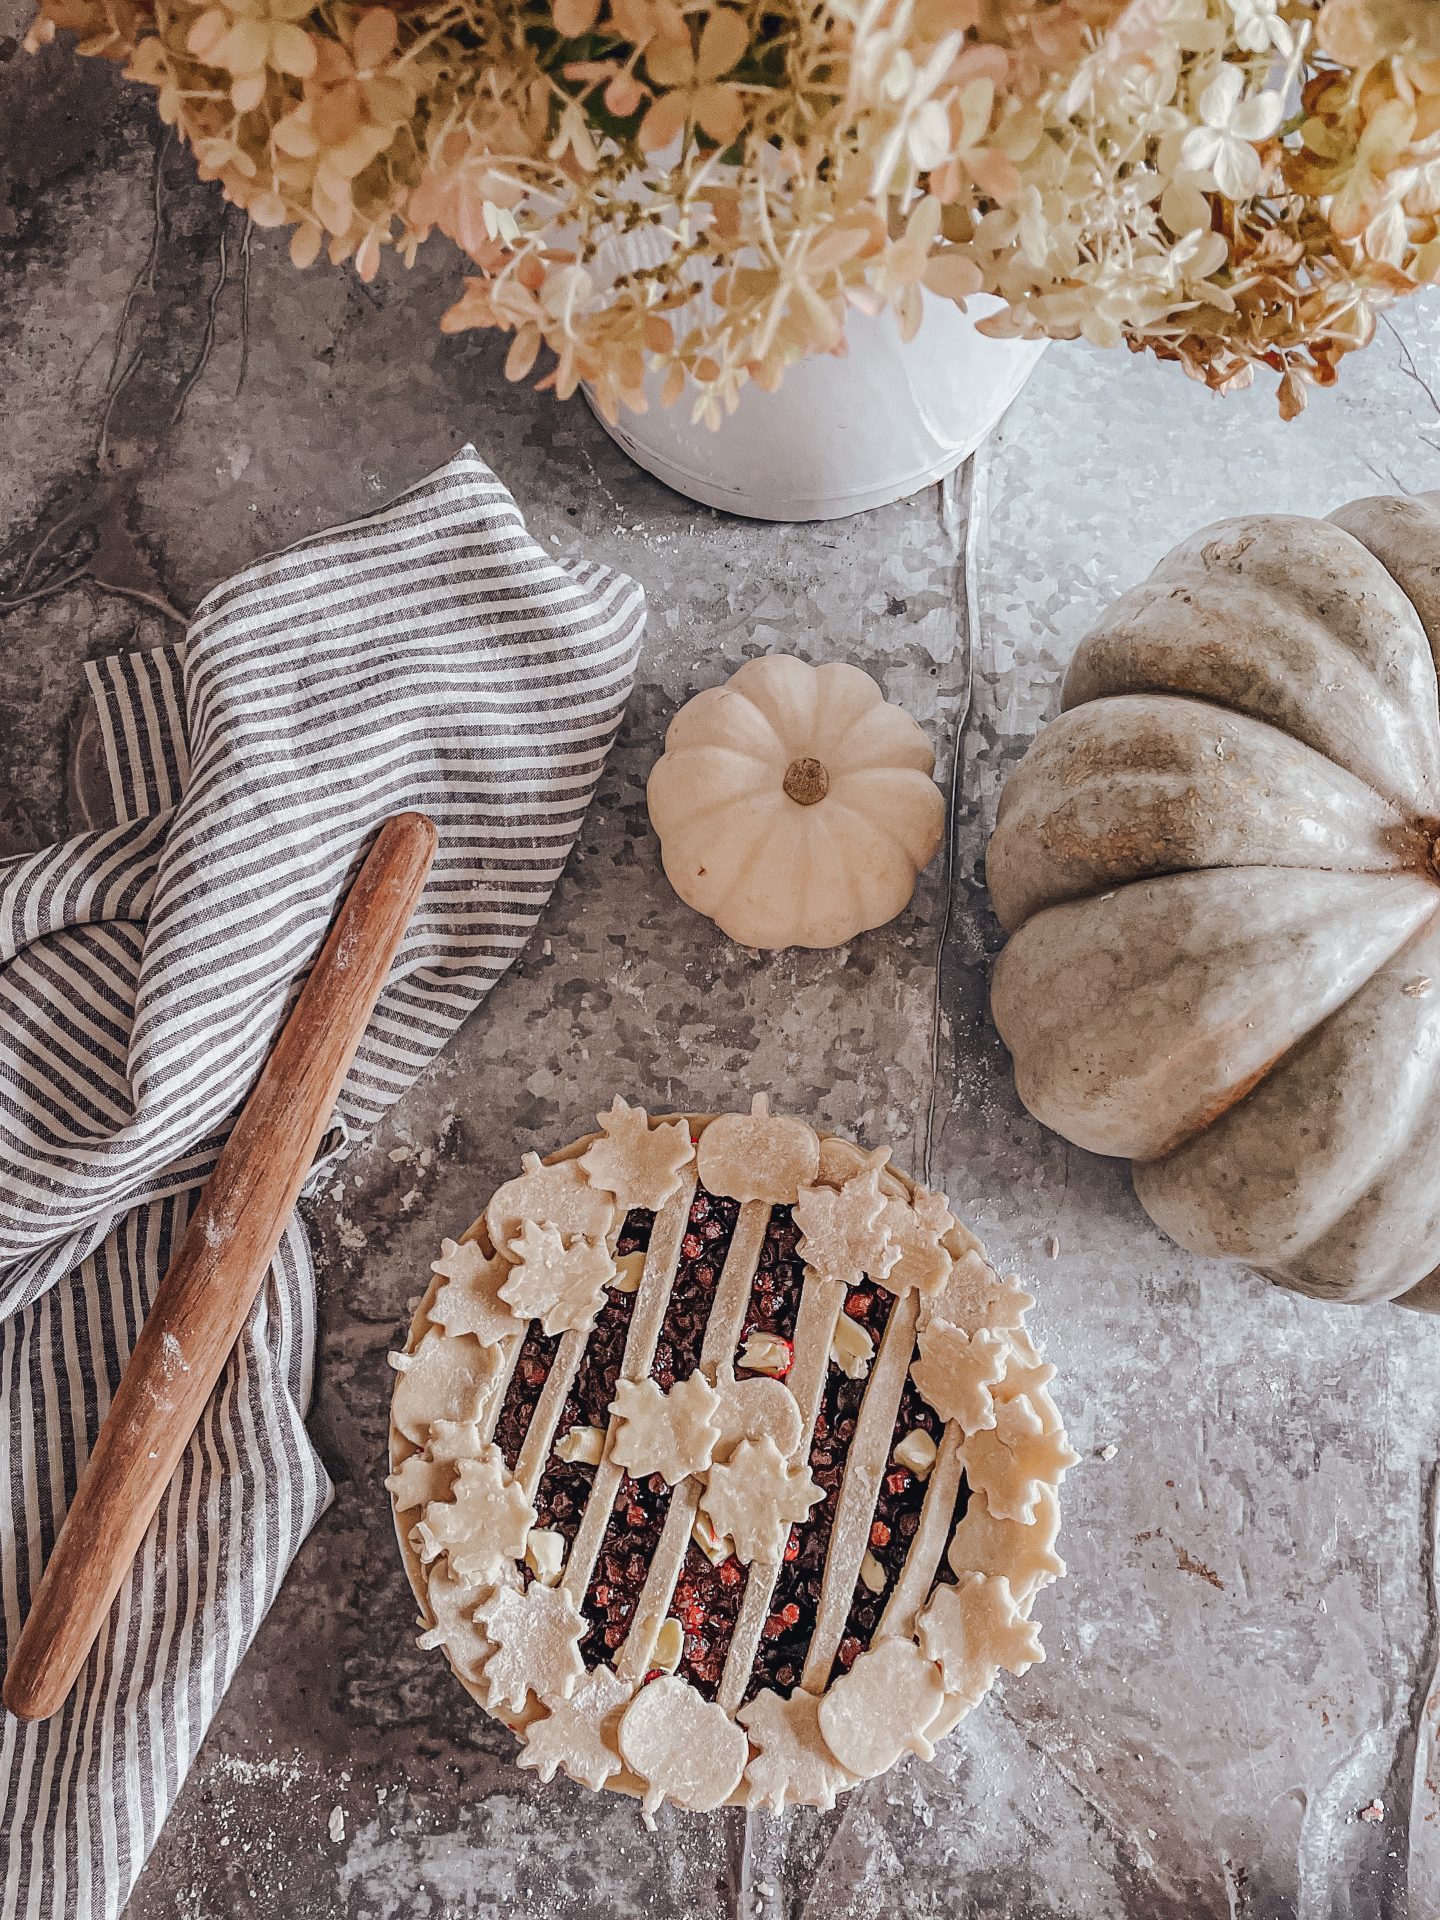 Saskatoon Berry pie in the fall with pumpkins and hydrangeas